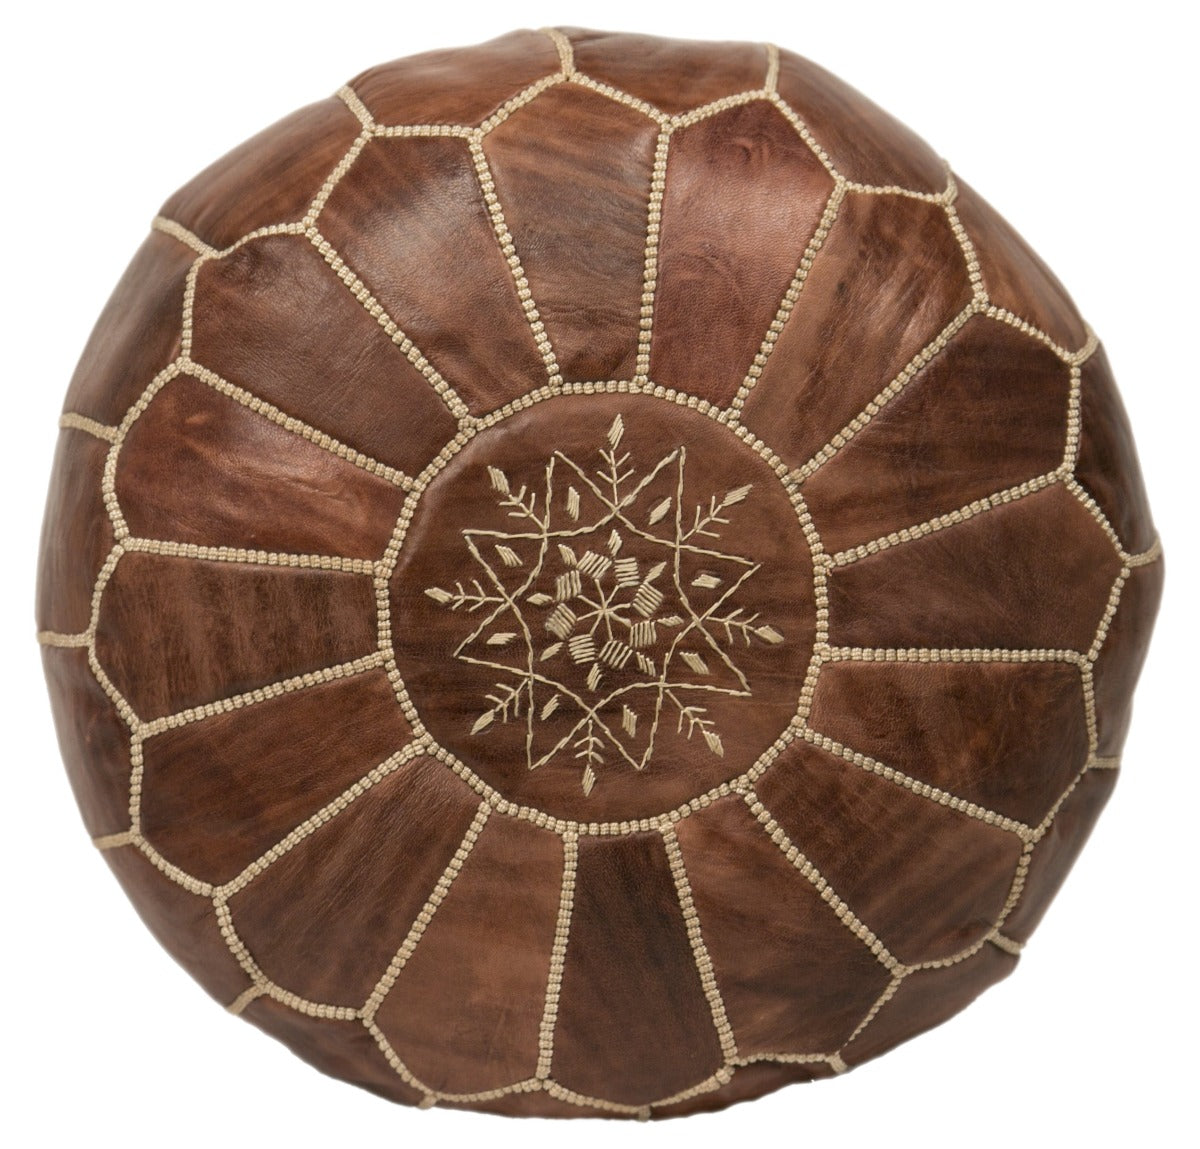 Embroidered Leather Pouf, Chestnut